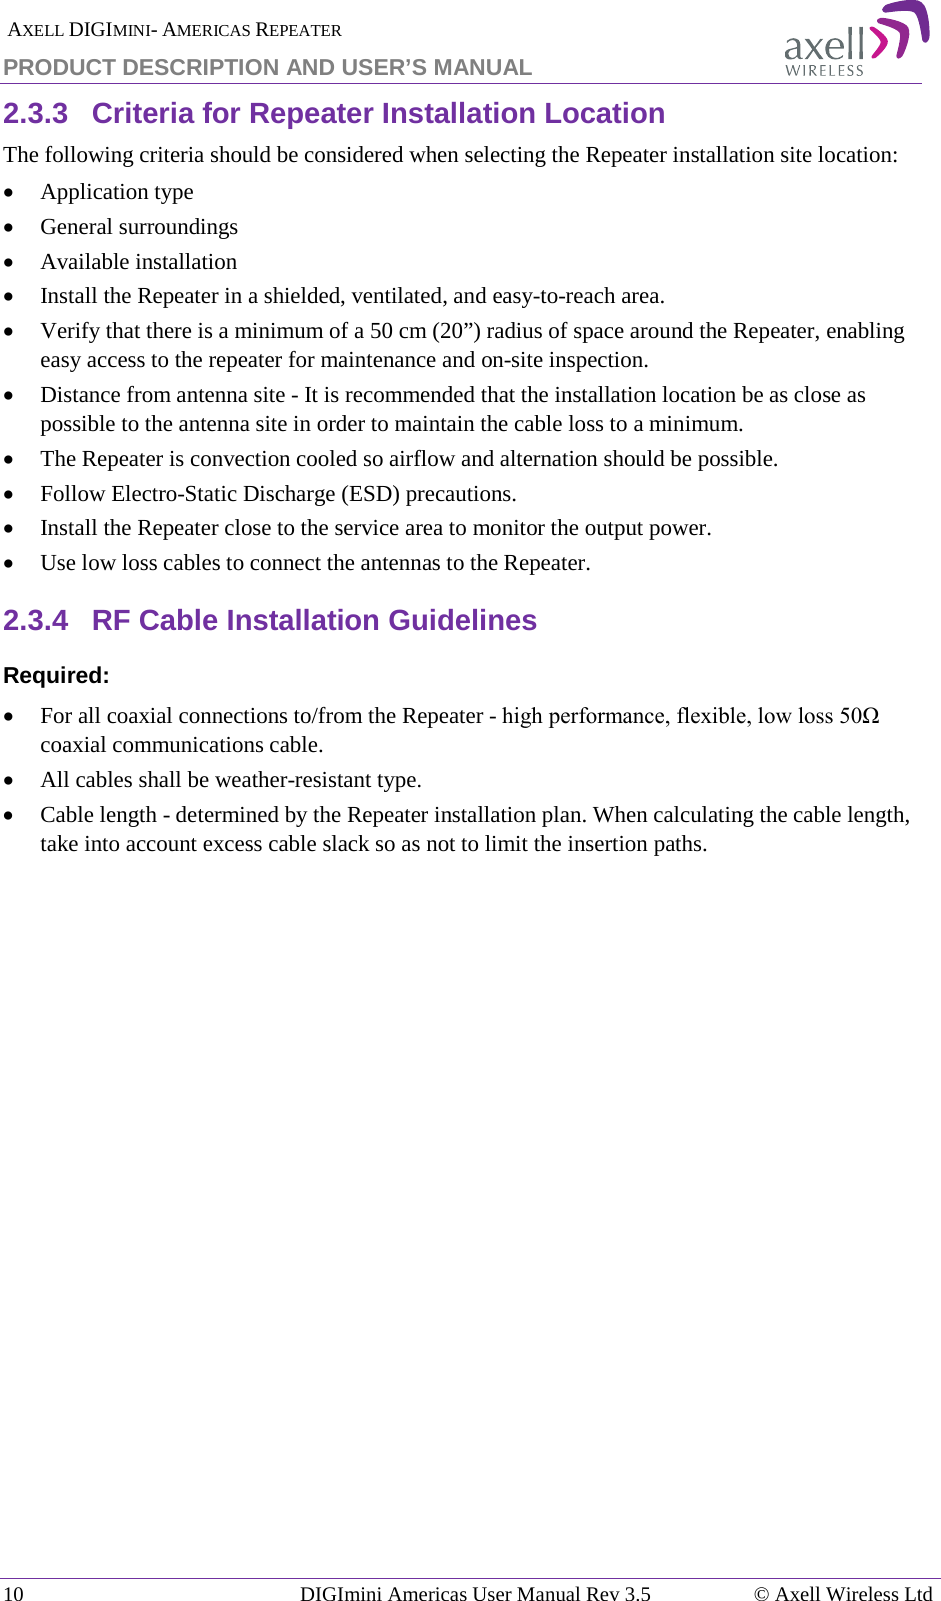  AXELL DIGIMINI- AMERICAS REPEATER PRODUCT DESCRIPTION AND USER’S MANUAL 10   DIGImini Americas User Manual Rev 3.5  © Axell Wireless Ltd 2.3.3  Criteria for Repeater Installation Location The following criteria should be considered when selecting the Repeater installation site location: • Application type • General surroundings • Available installation • Install the Repeater in a shielded, ventilated, and easy-to-reach area. • Verify that there is a minimum of a 50 cm (20”) radius of space around the Repeater, enabling easy access to the repeater for maintenance and on-site inspection. • Distance from antenna site - It is recommended that the installation location be as close as possible to the antenna site in order to maintain the cable loss to a minimum. • The Repeater is convection cooled so airflow and alternation should be possible. • Follow Electro-Static Discharge (ESD) precautions. • Install the Repeater close to the service area to monitor the output power. • Use low loss cables to connect the antennas to the Repeater. 2.3.4  RF Cable Installation Guidelines Required: • For all coaxial connections to/from the Repeater - high performance, flexible, low loss 50Ω coaxial communications cable.  • All cables shall be weather-resistant type.  • Cable length - determined by the Repeater installation plan. When calculating the cable length, take into account excess cable slack so as not to limit the insertion paths. 